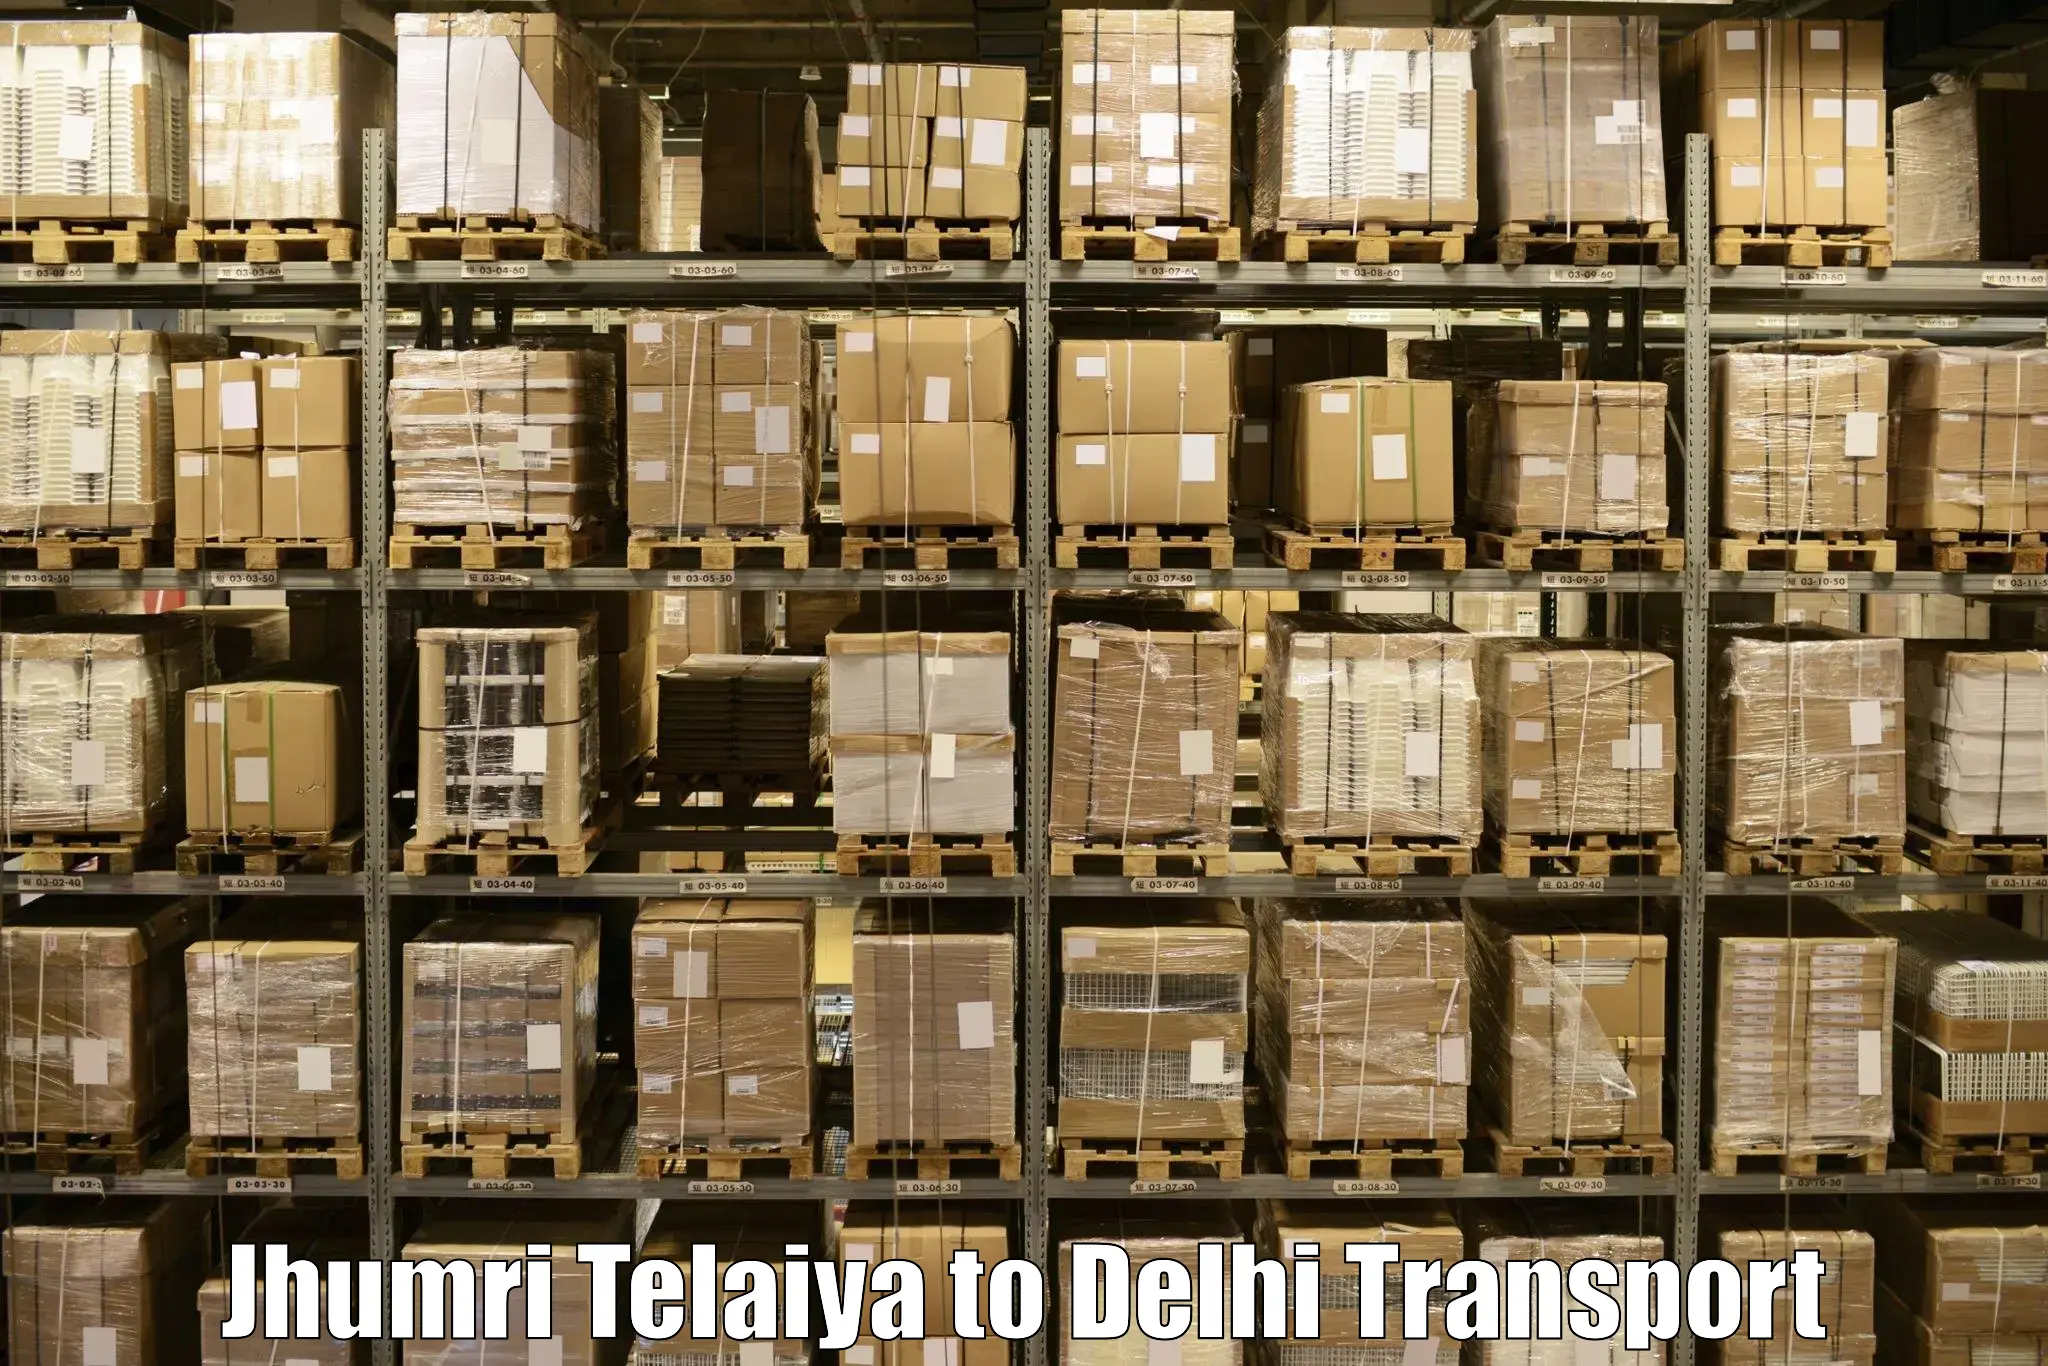 Transport bike from one state to another Jhumri Telaiya to University of Delhi